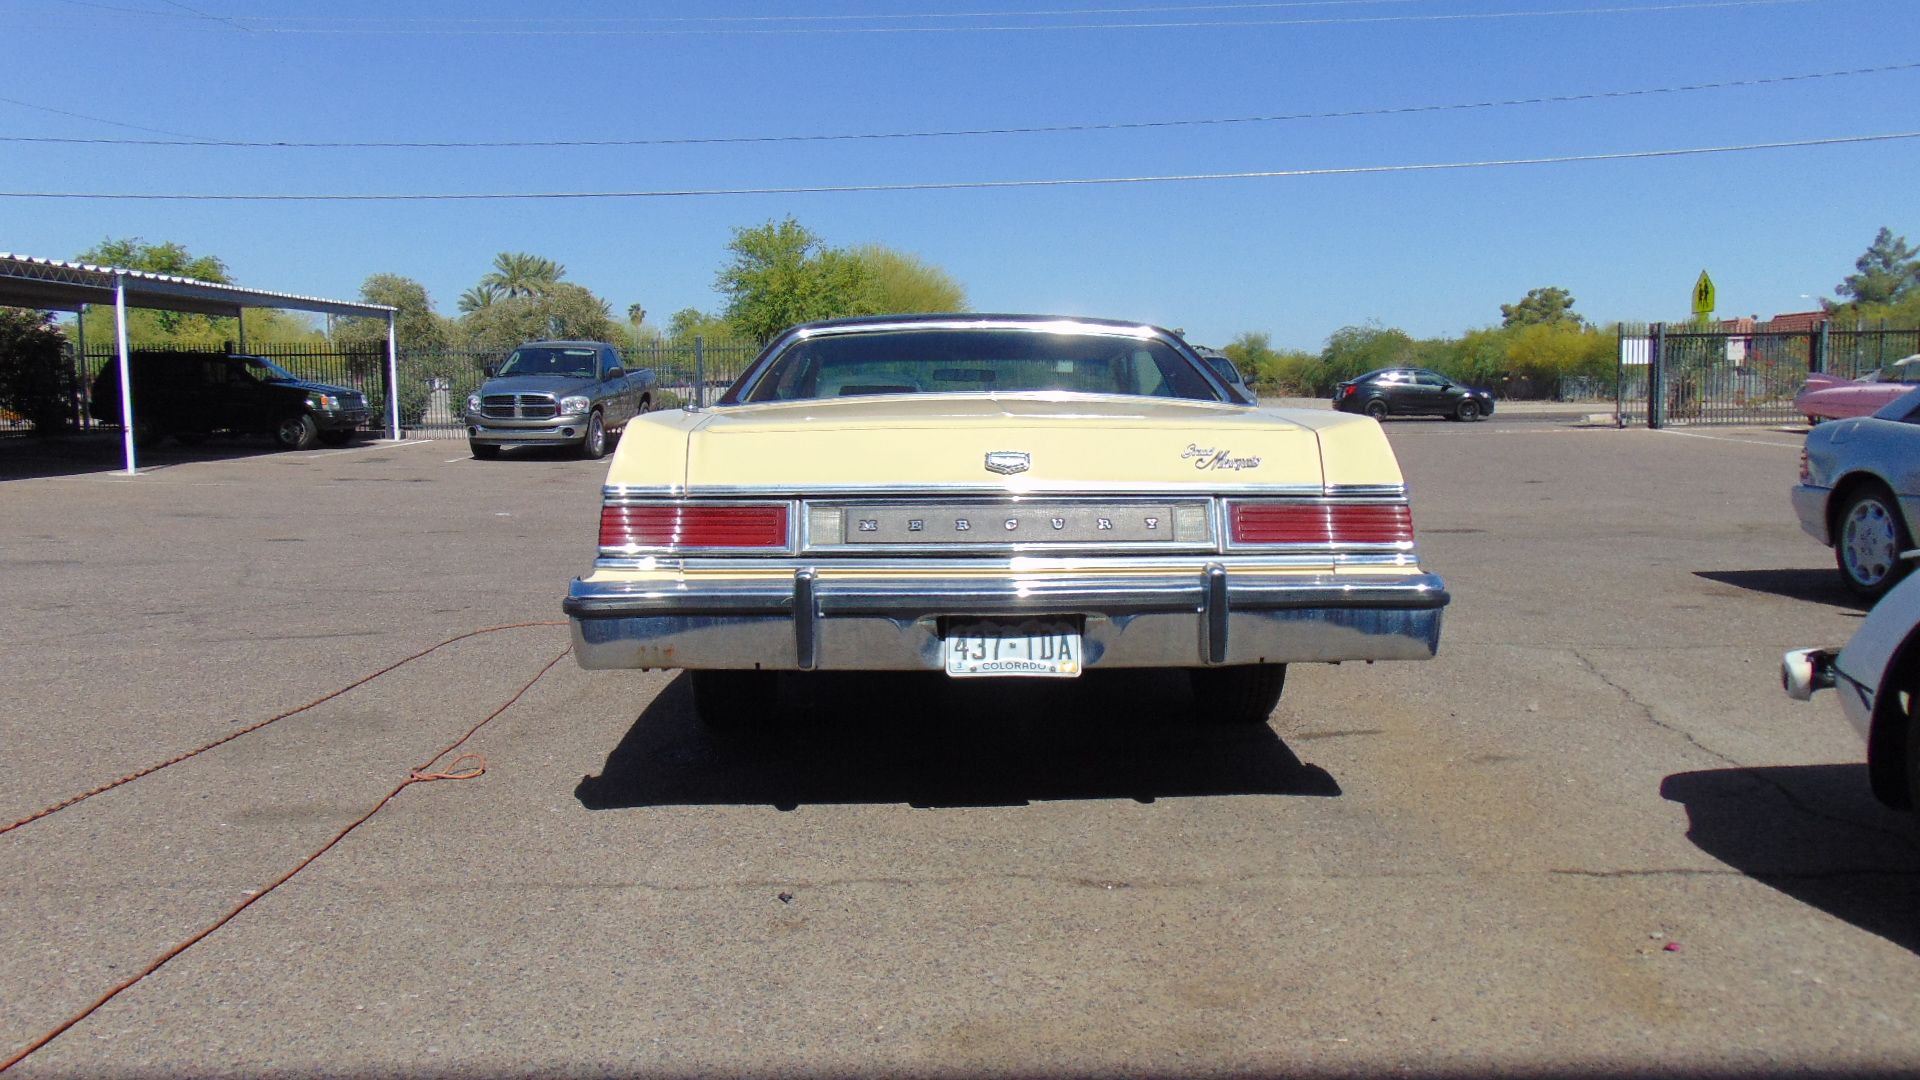 1978 MERCURY GRAND MARQUIS, ODOMETER READING 12,838, VIN. 8Z65S644505, 351M GAS, AUTO TRANS, FWD, CR - Image 4 of 13